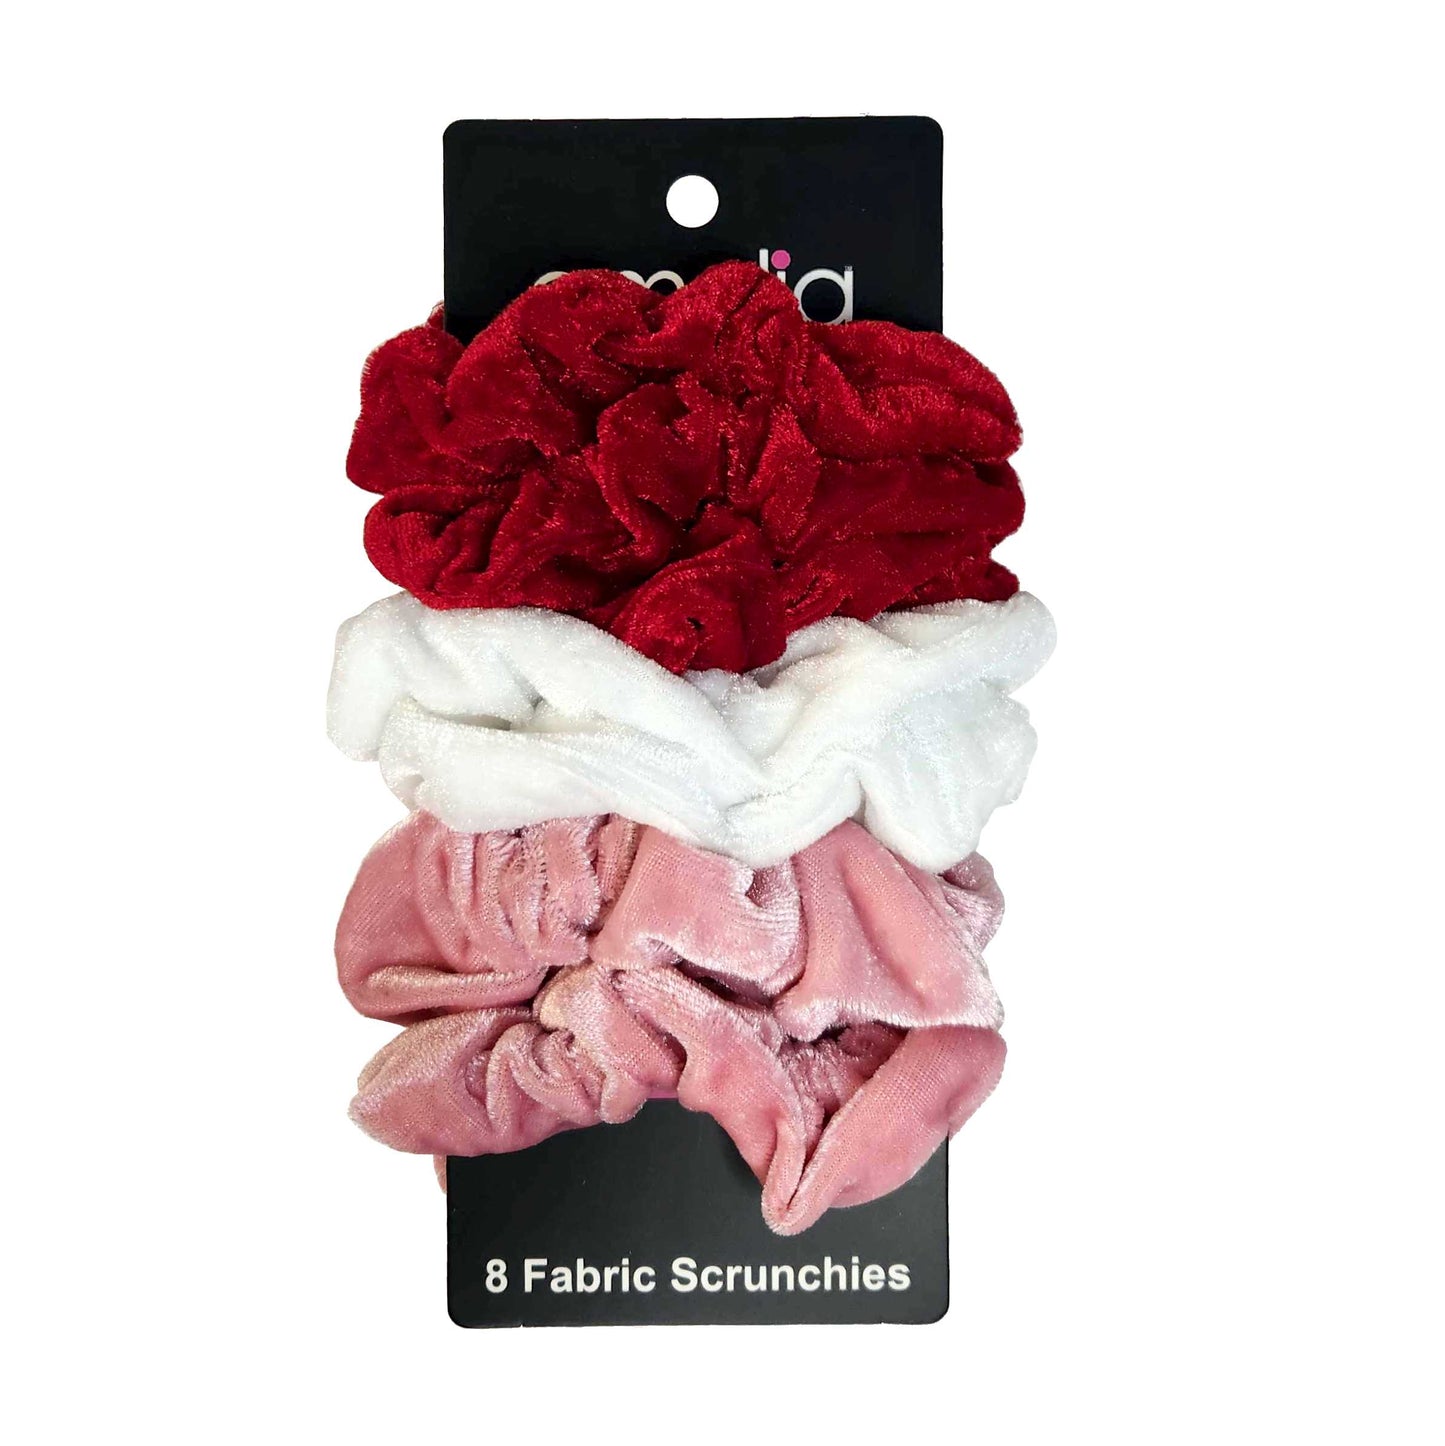 Amelia Beauty, Reds Mix Velvet Scrunchies, 3.5in Diameter, Gentle on Hair, Strong Hold, No Snag, No Dents or Creases. 8 Pack